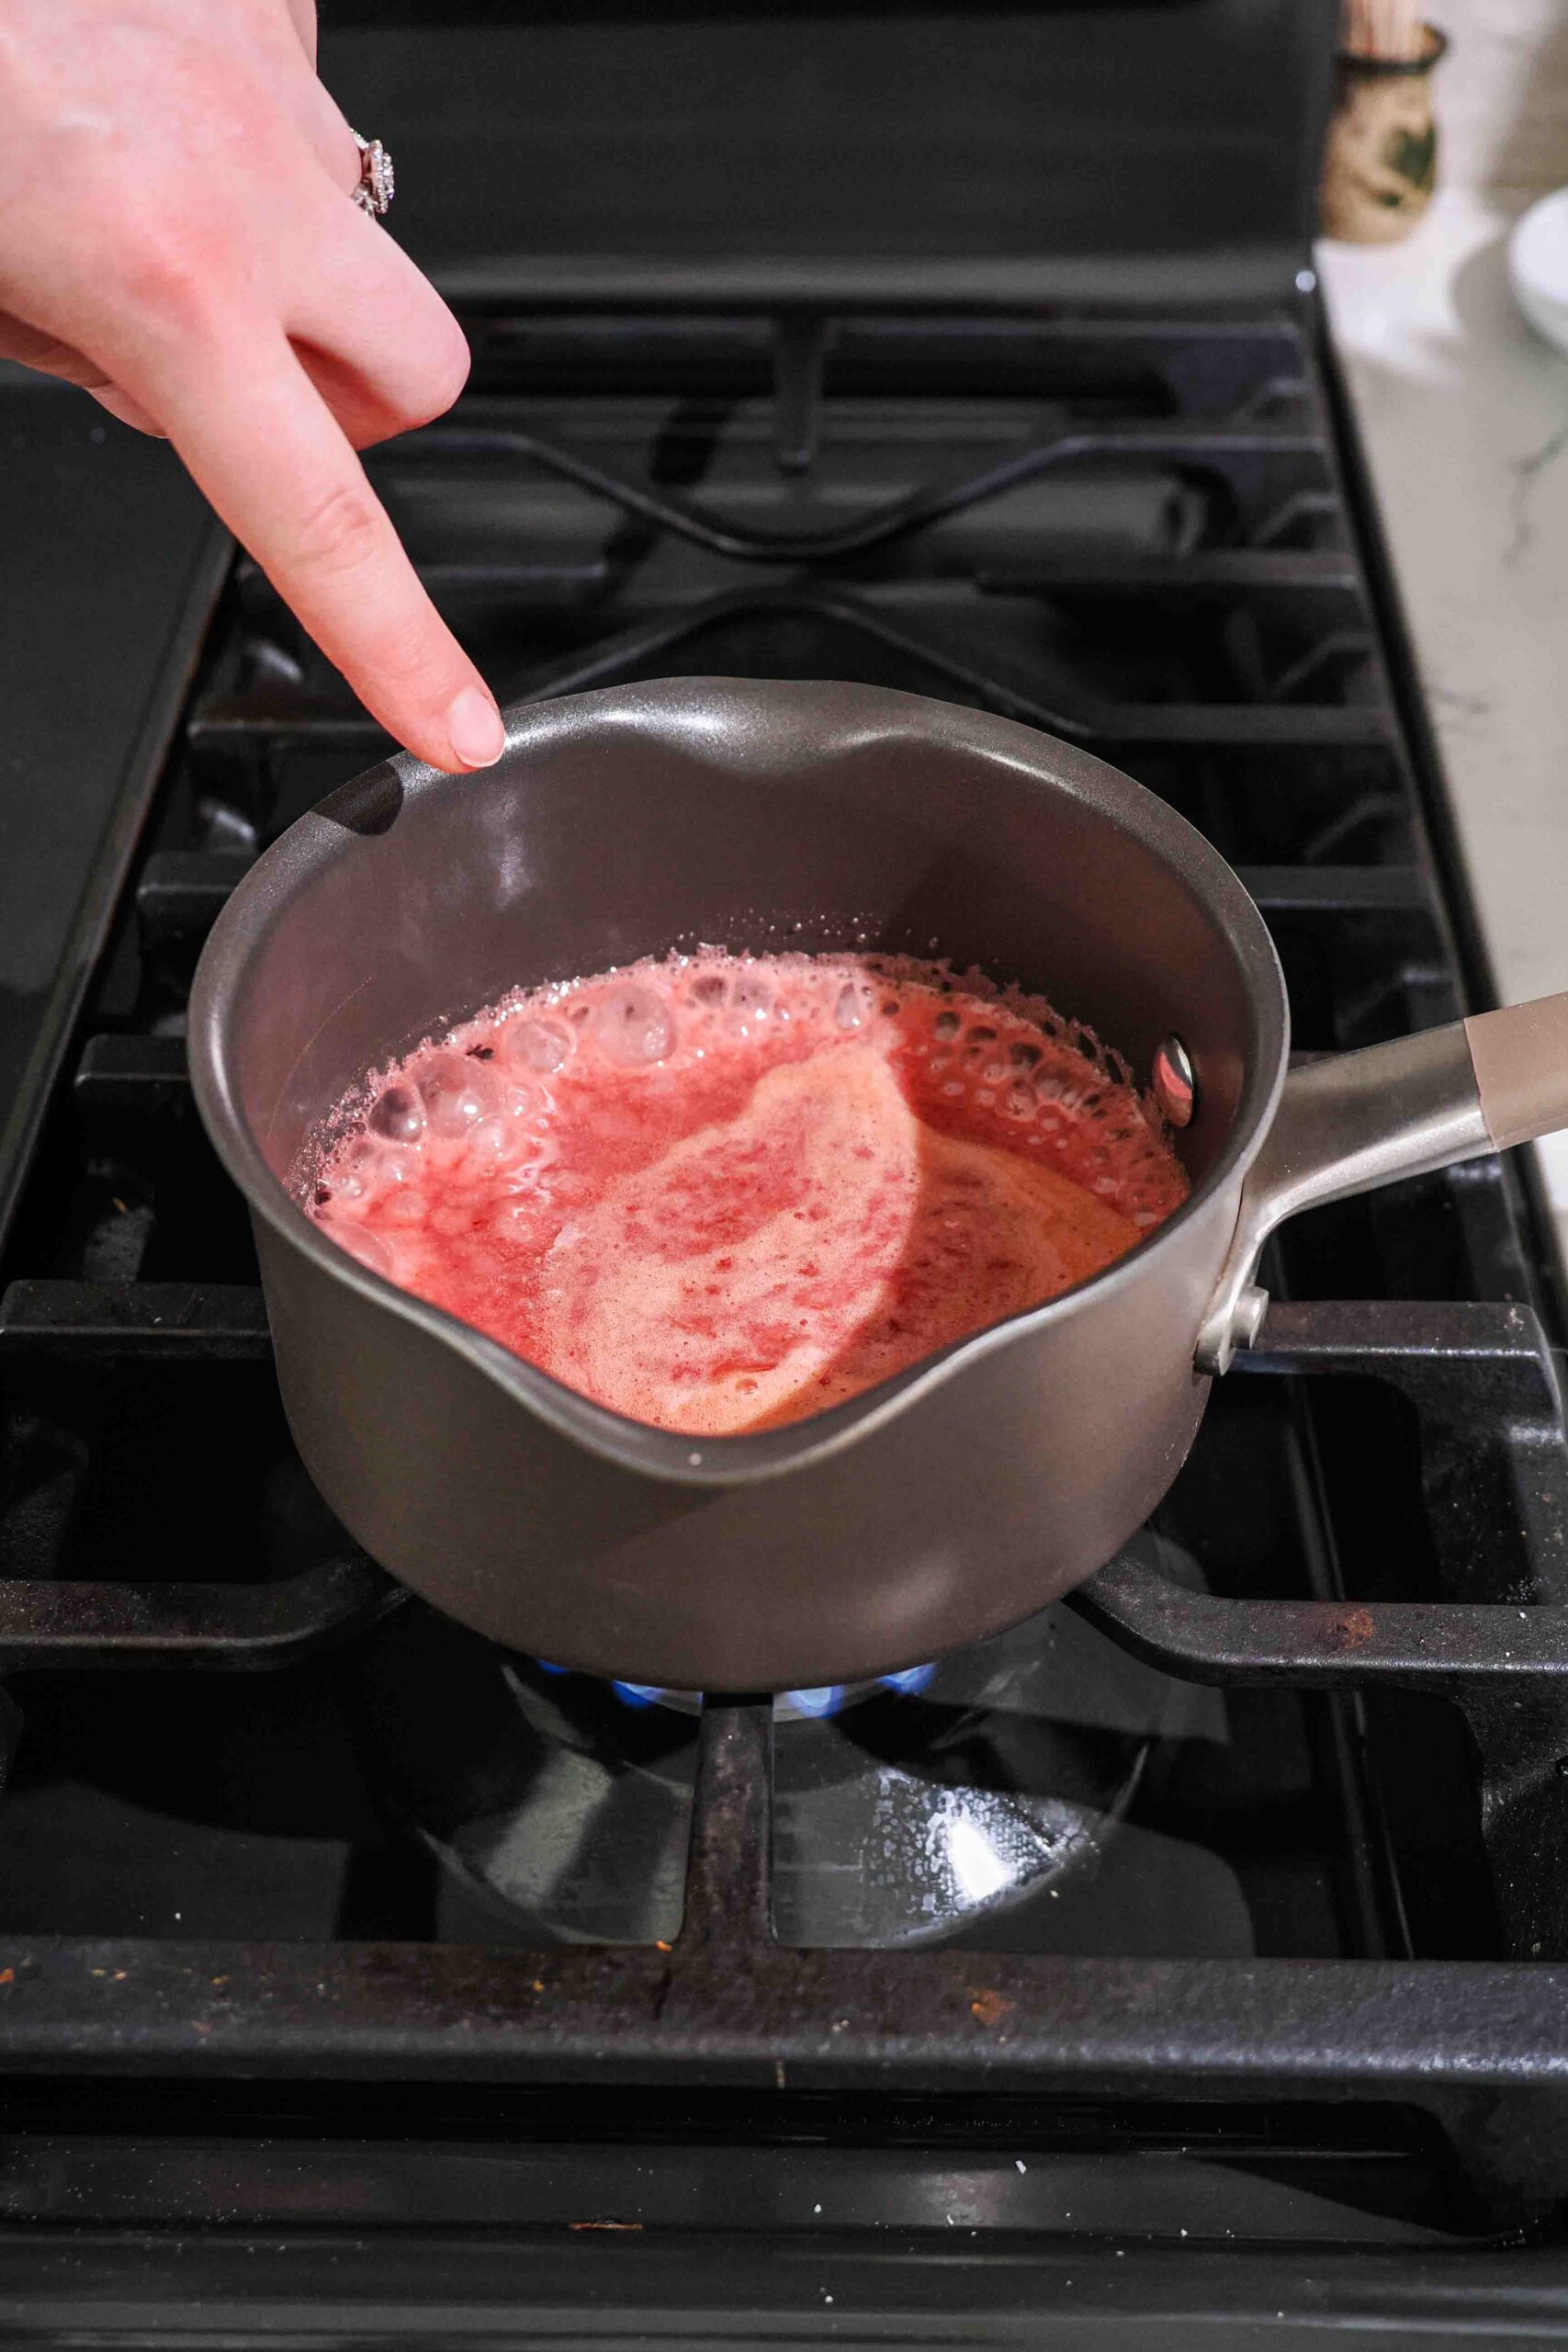 Red cherry liquid boils in a small saucepan over the stove.